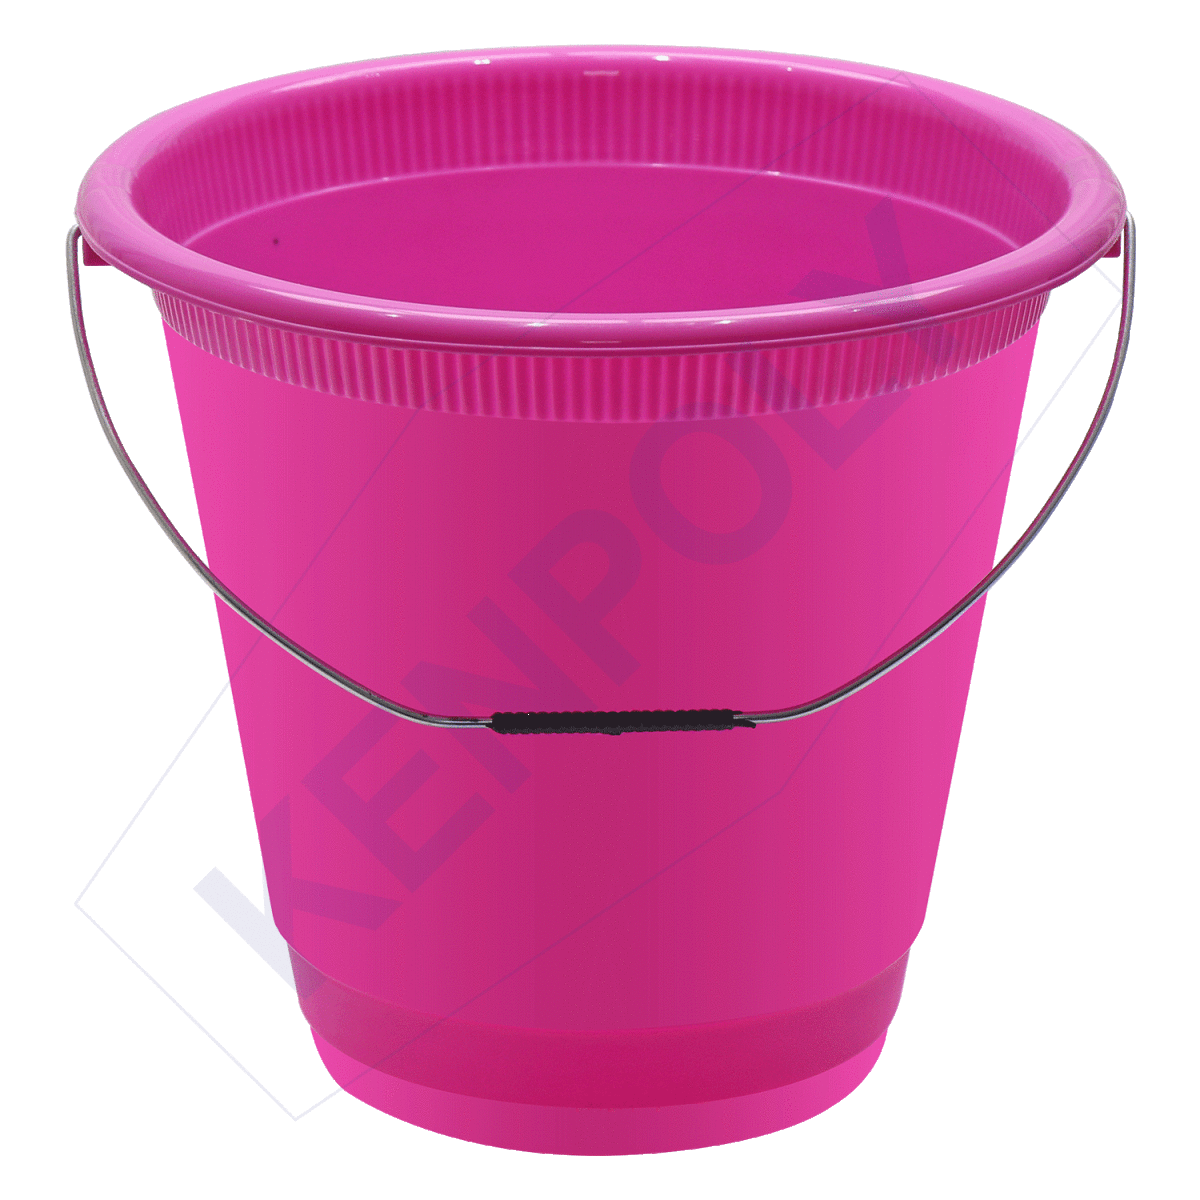 Smiley 5 Bucket without Lid